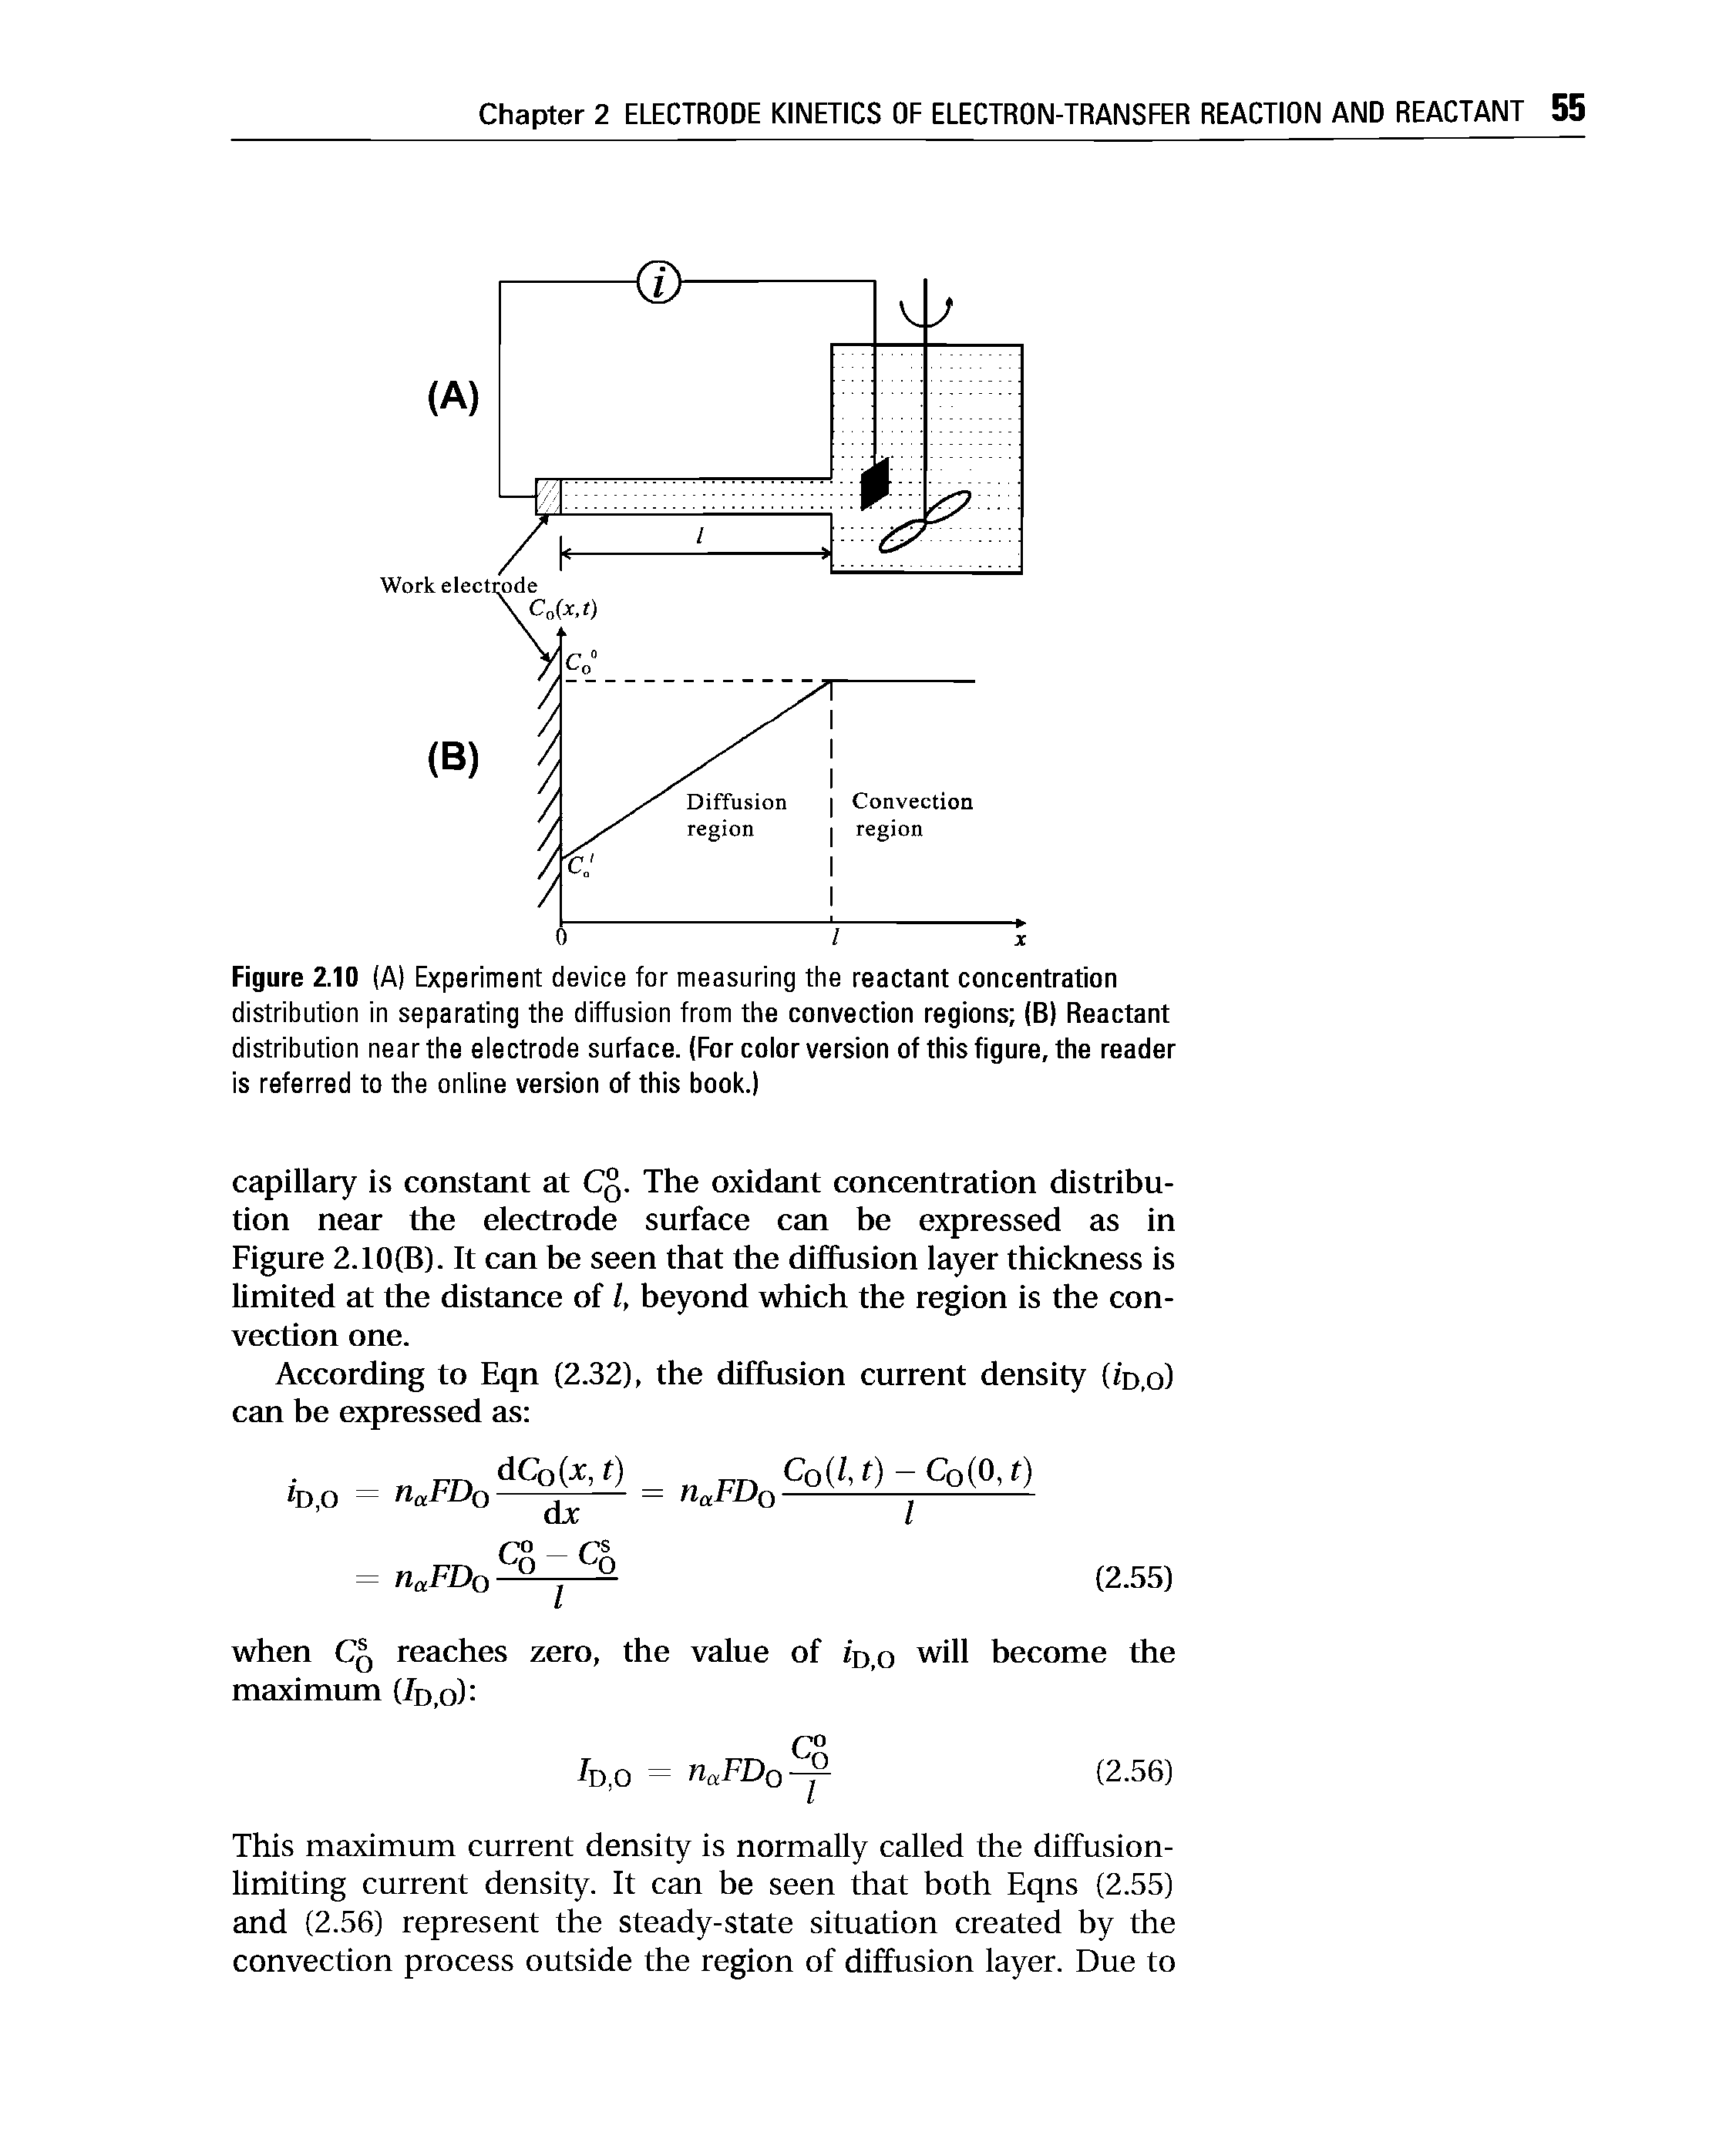 Figure 2.10 (A) Experiment device for measuring the reactant concentration distribution in separating the diffusion from the convection regions (B) Reactant distribution near the electrode surface. (For color version of this figure, the reader is referred to the online version of this book.)...